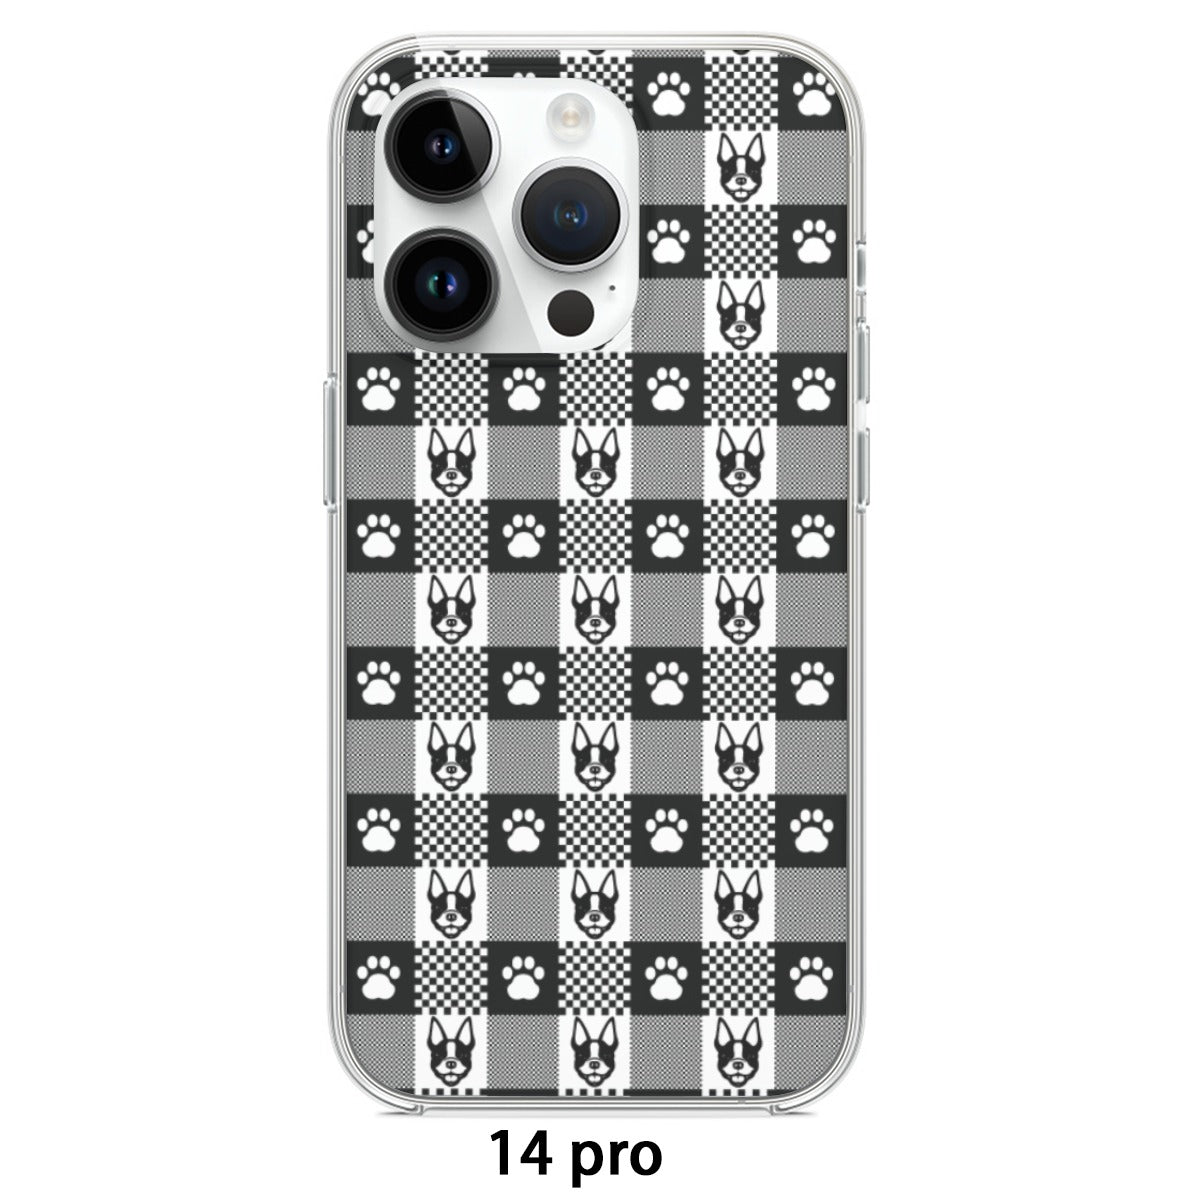 Charlie - iPhone case for Boston Terrier lovers